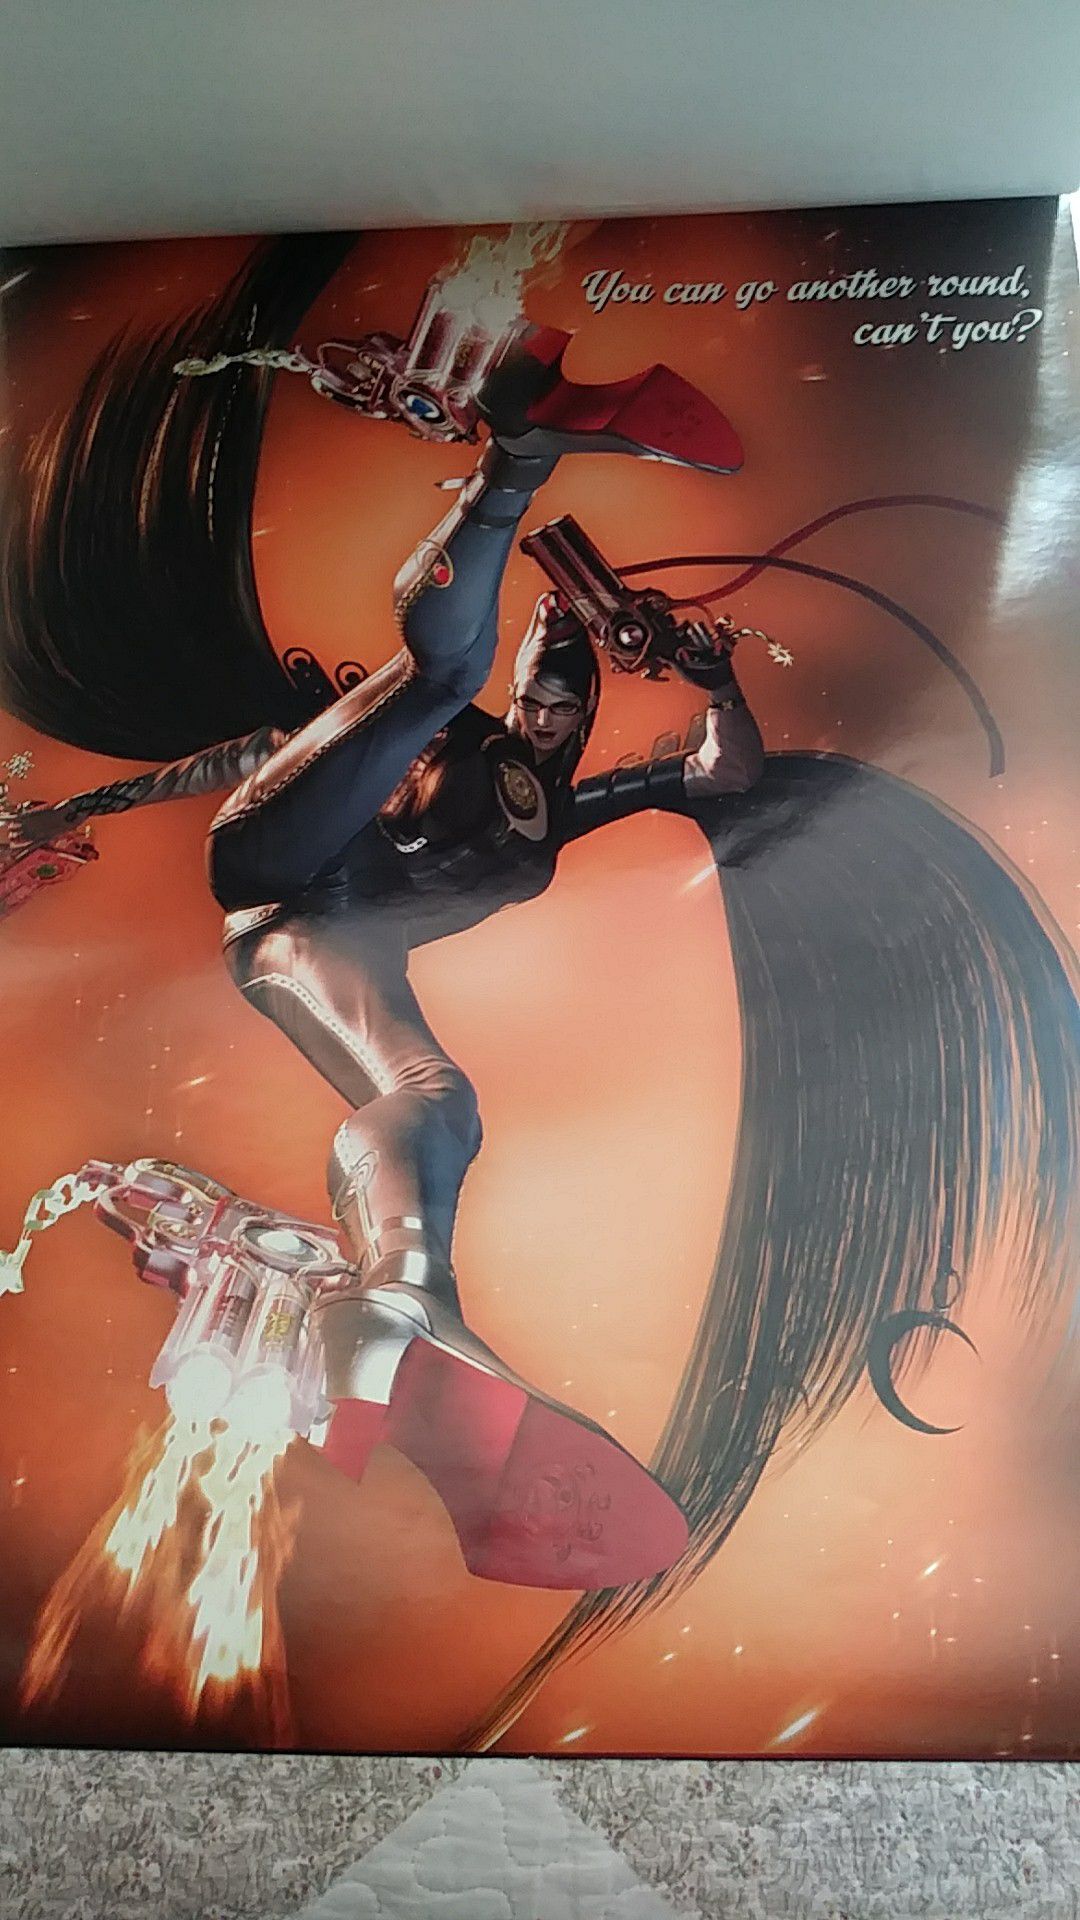 Bayonetta 2 (No background) Poster for Sale by cridraw